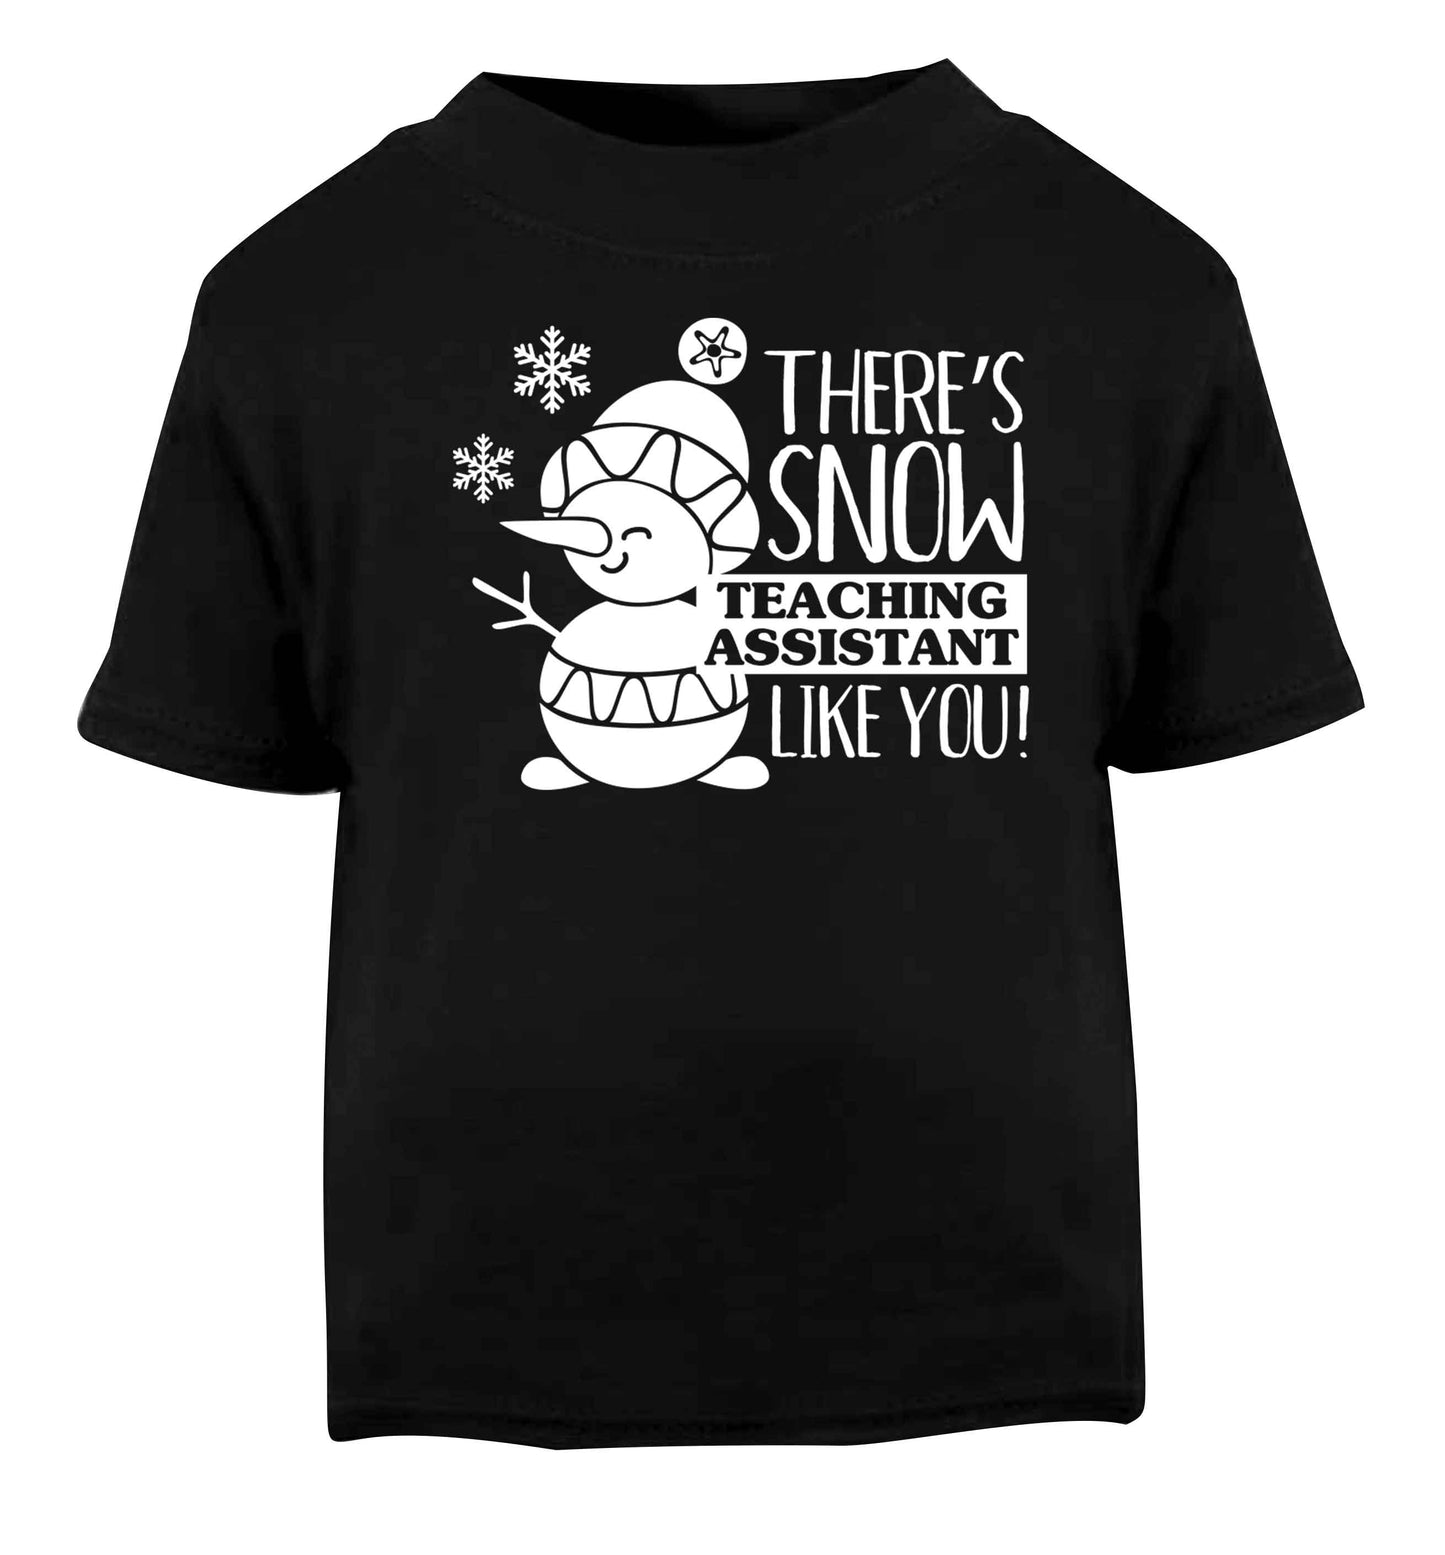 There's snow teaching assistant like you Black baby toddler Tshirt 2 years